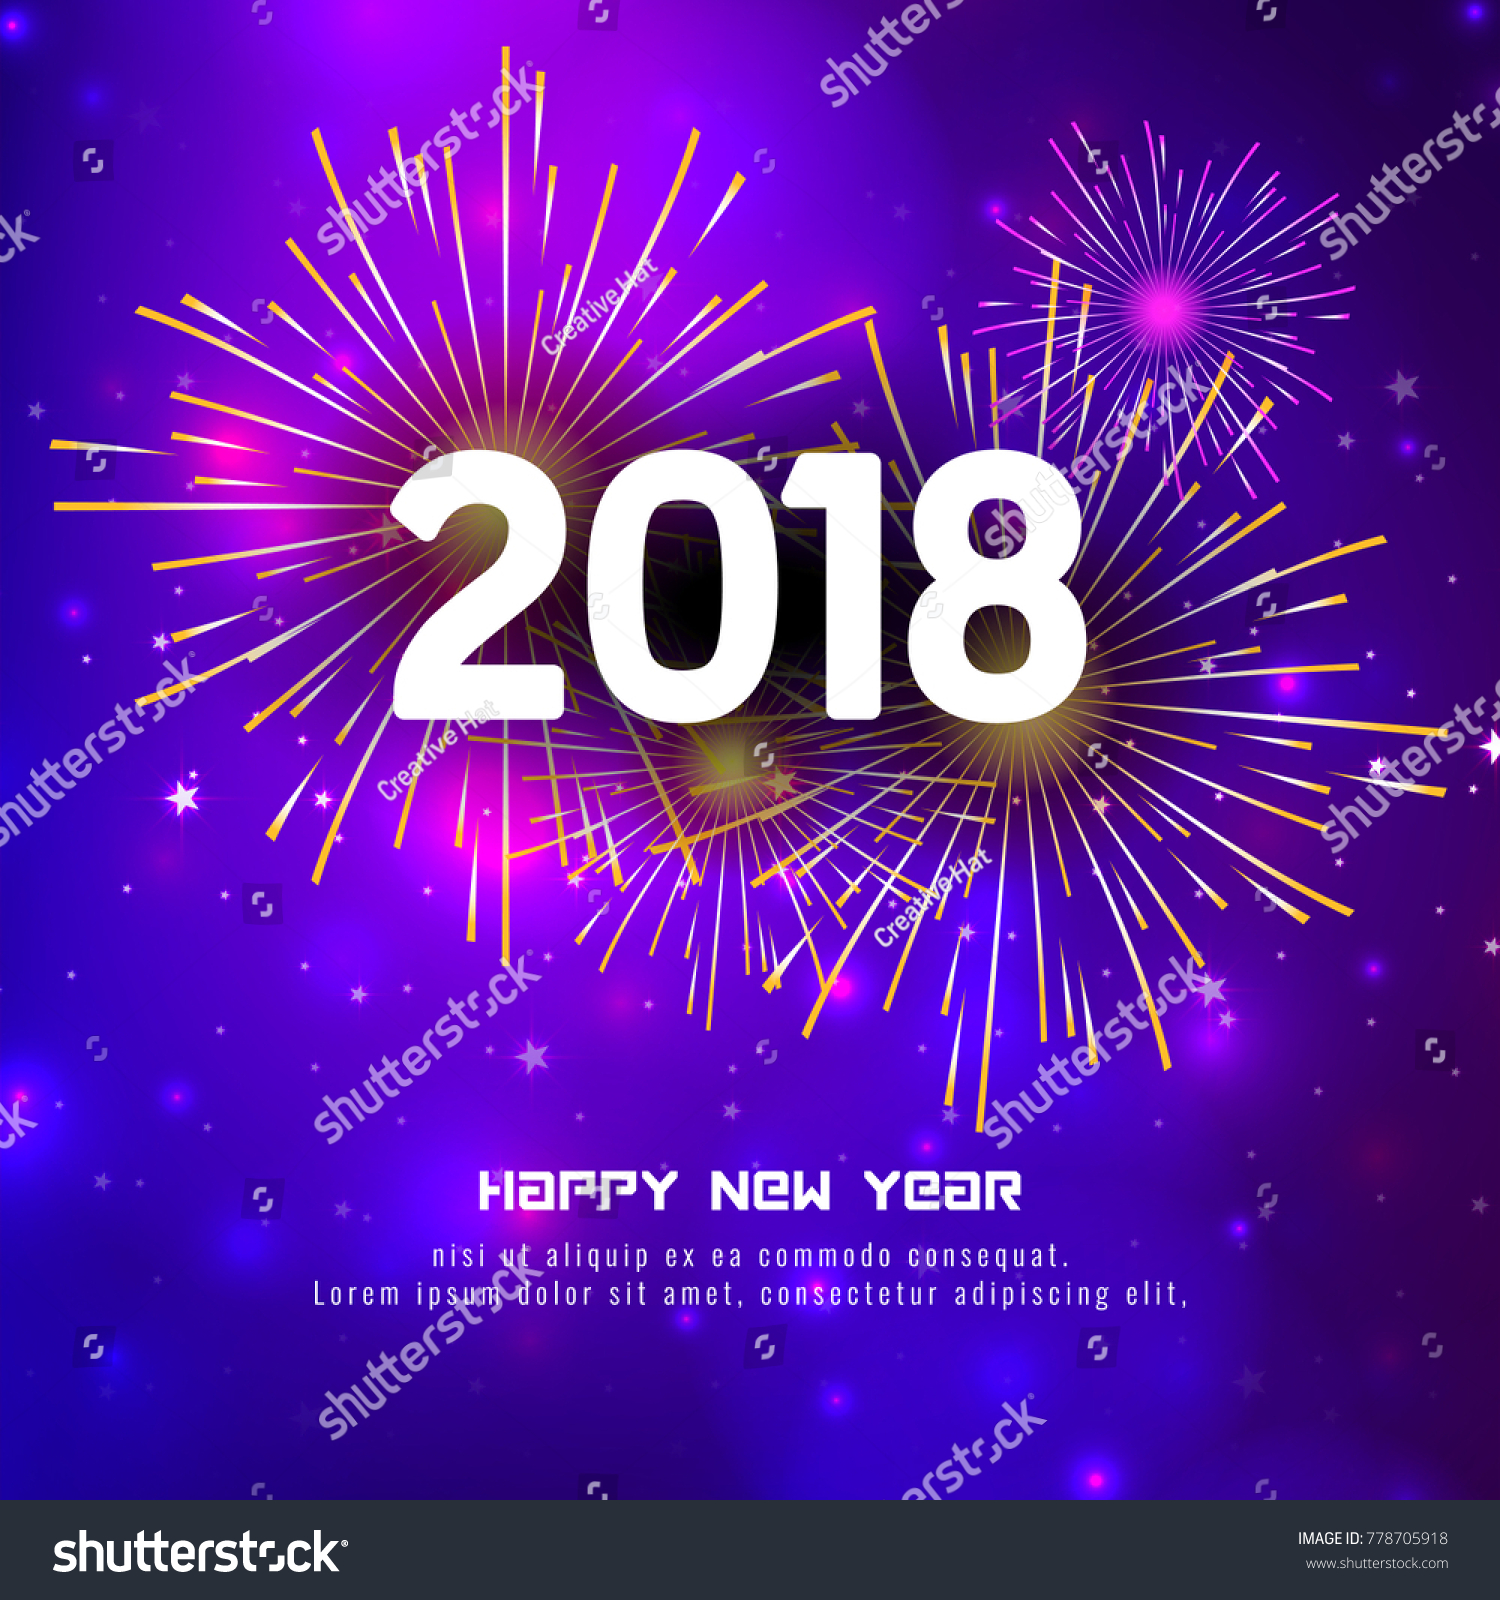 Abstract Happy New Year 2018 Bright Stock Vector 778705918 - Shutterstock